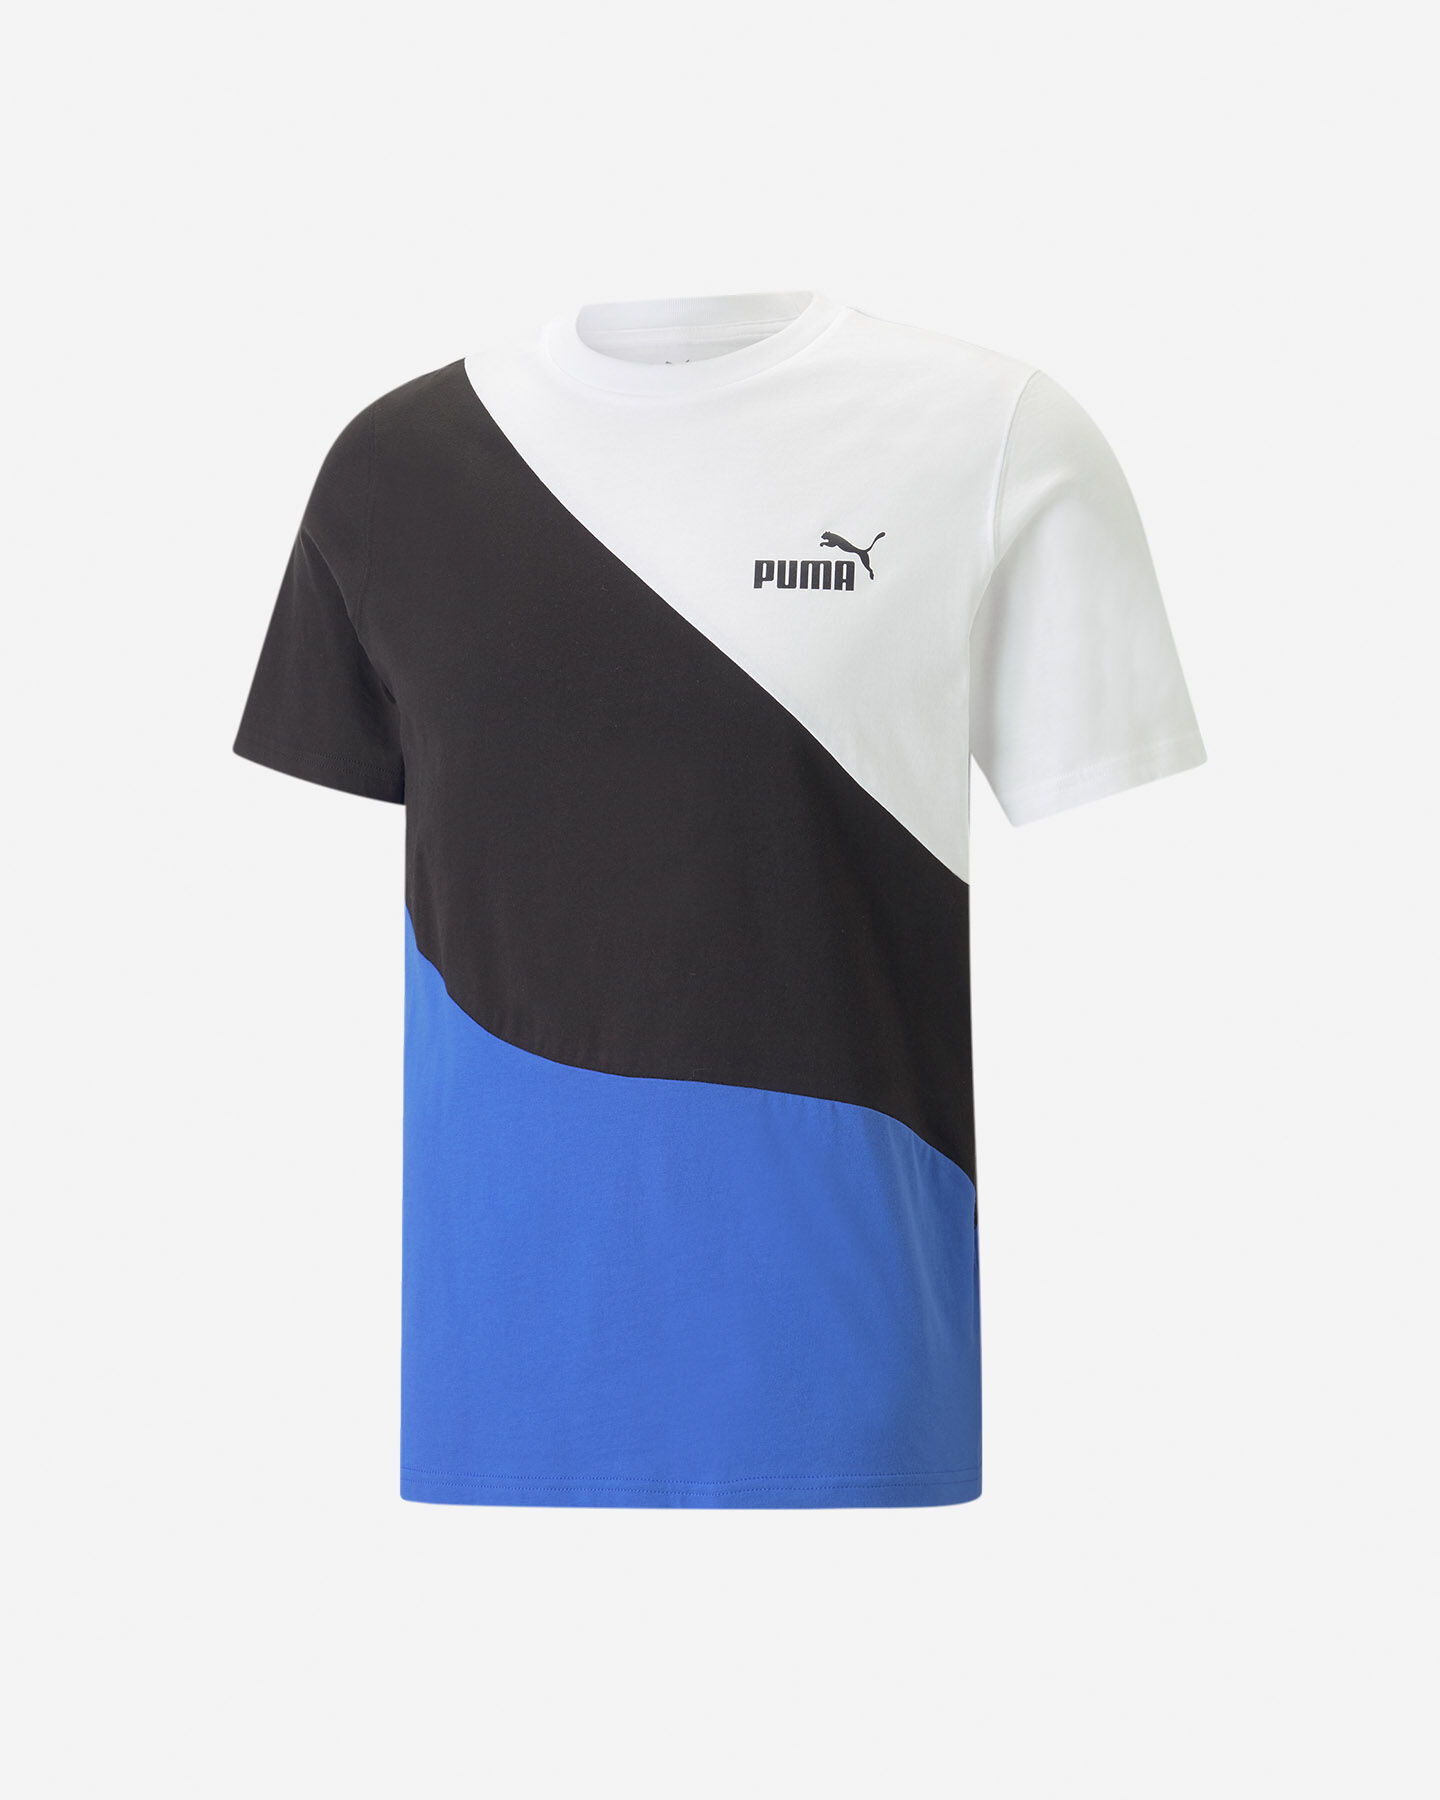  T-Shirt PUMA POWER 3COLORS M S5541494|92|S scatto 0